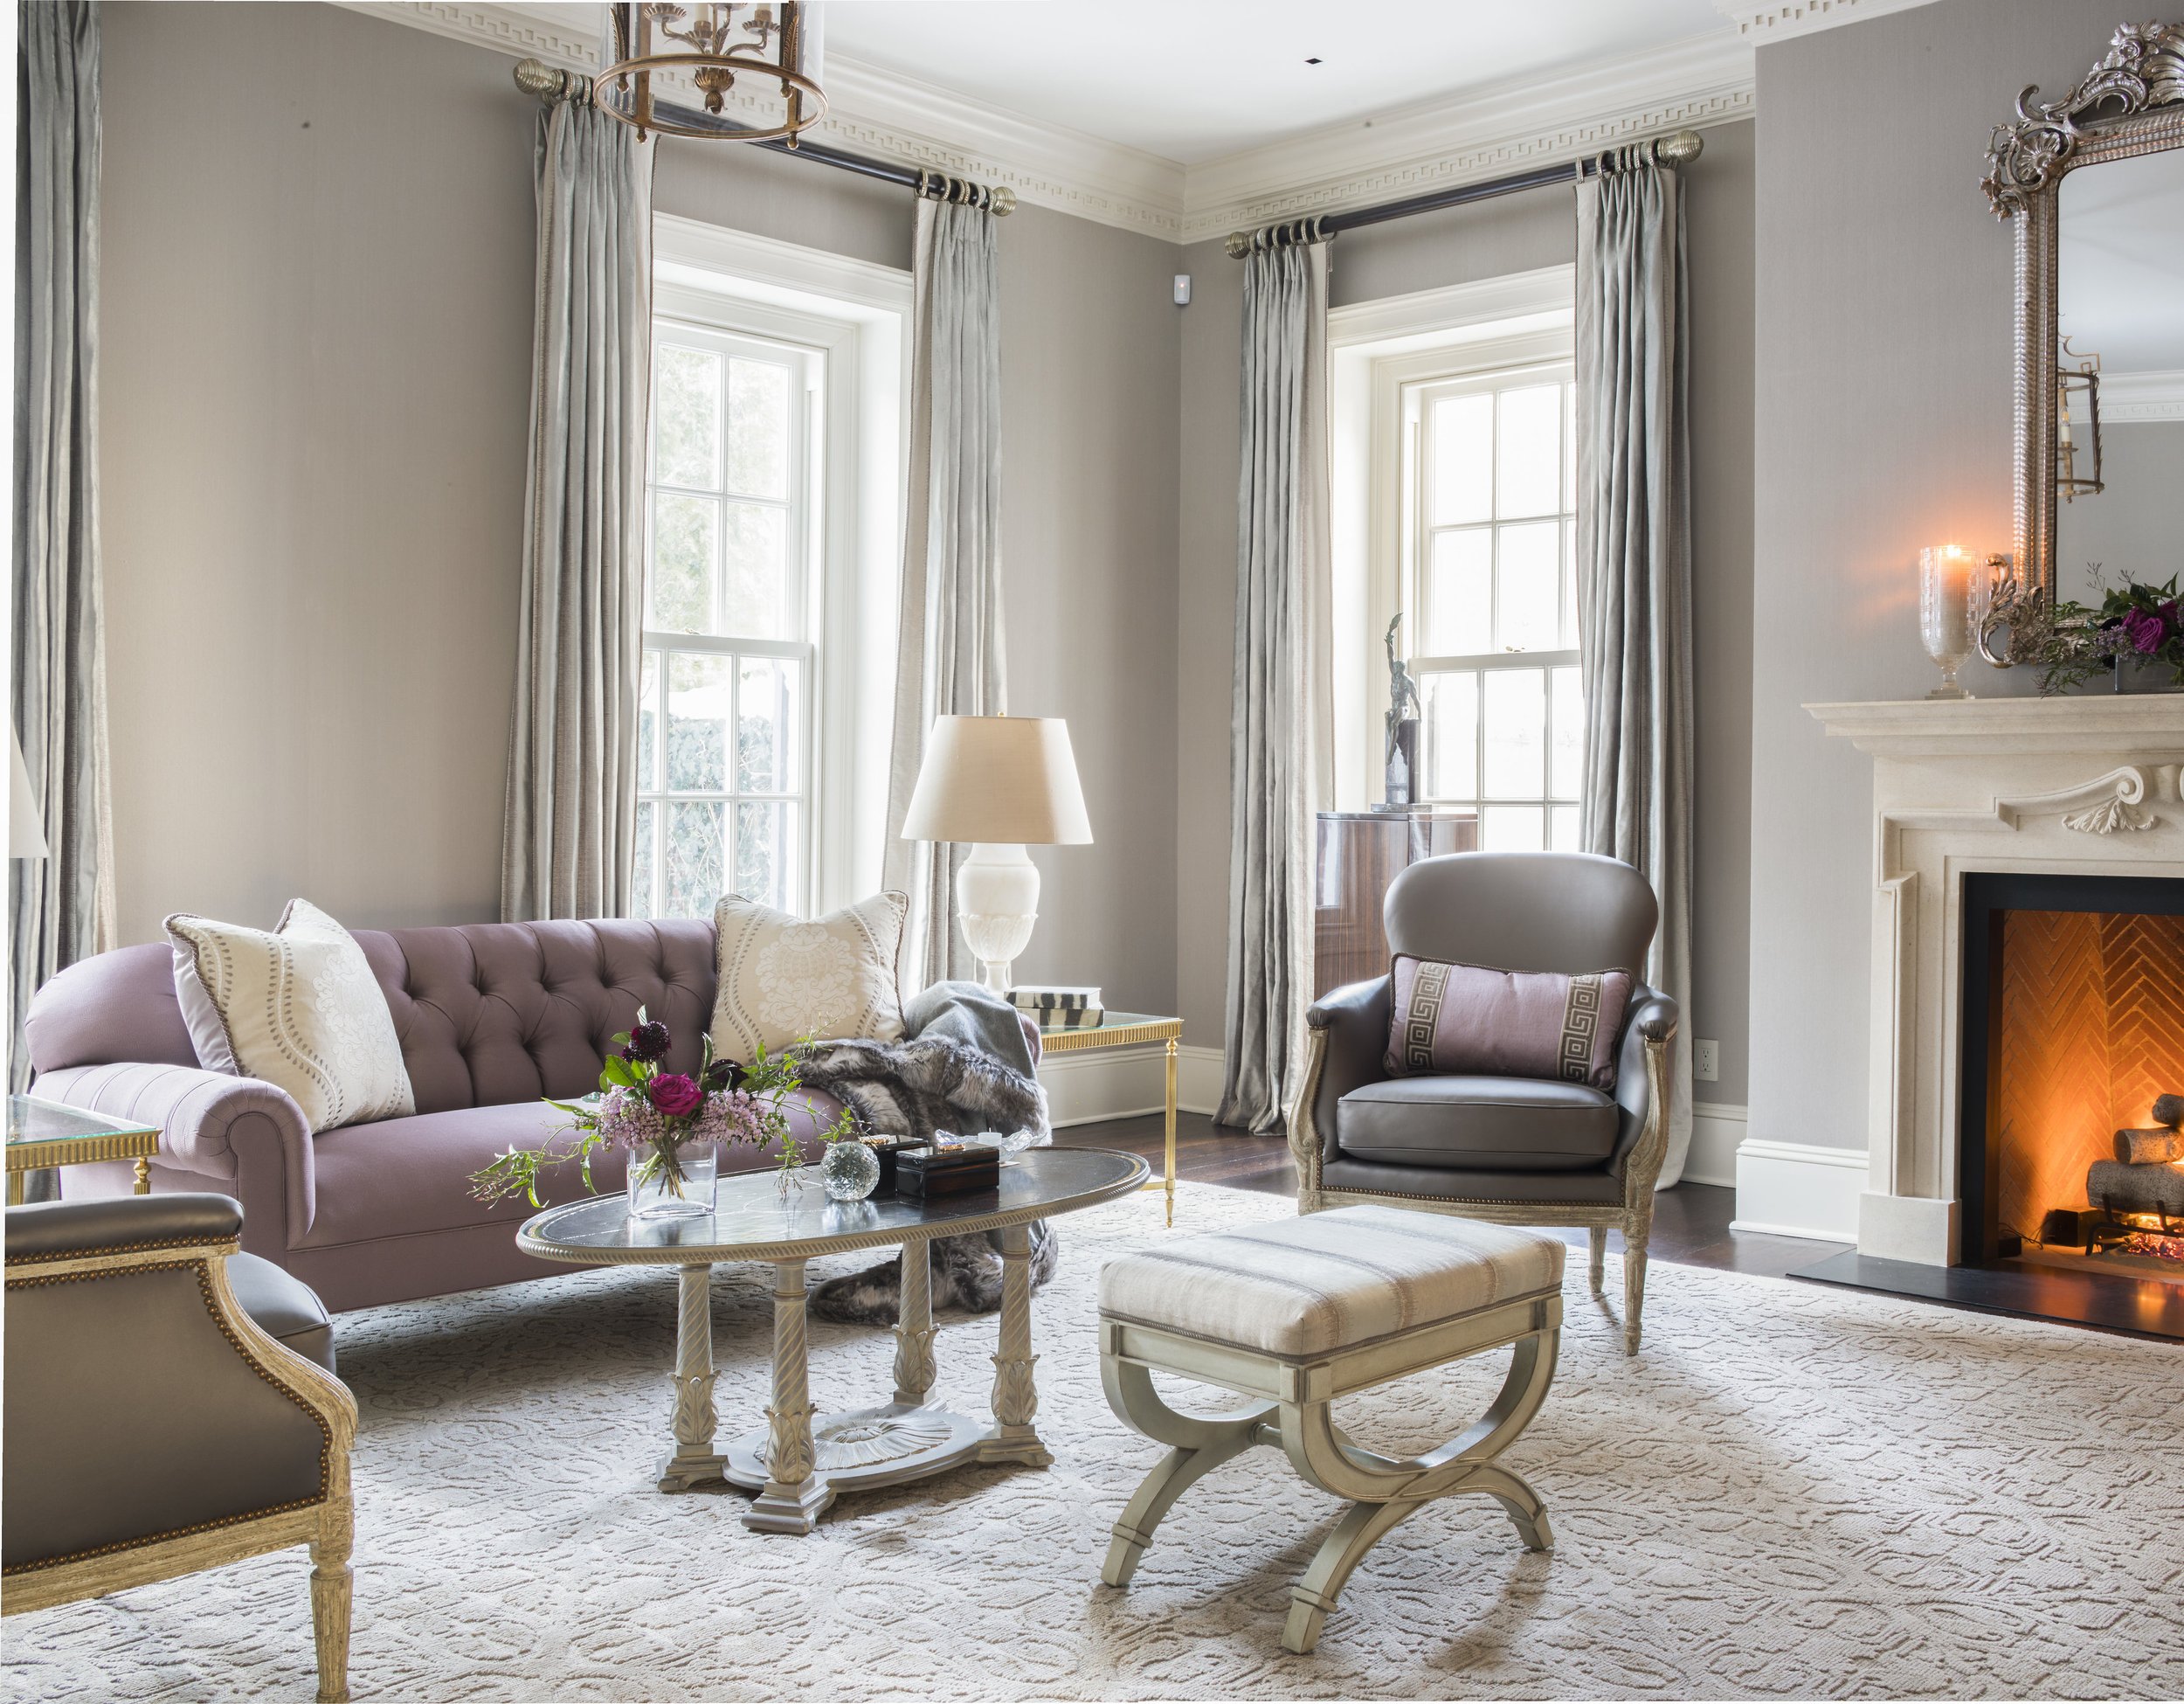 13-sitting-area-gray-purple-moden-elegant-romantic-sophisticated-neoclassical-greenwich-connecticut.JPG